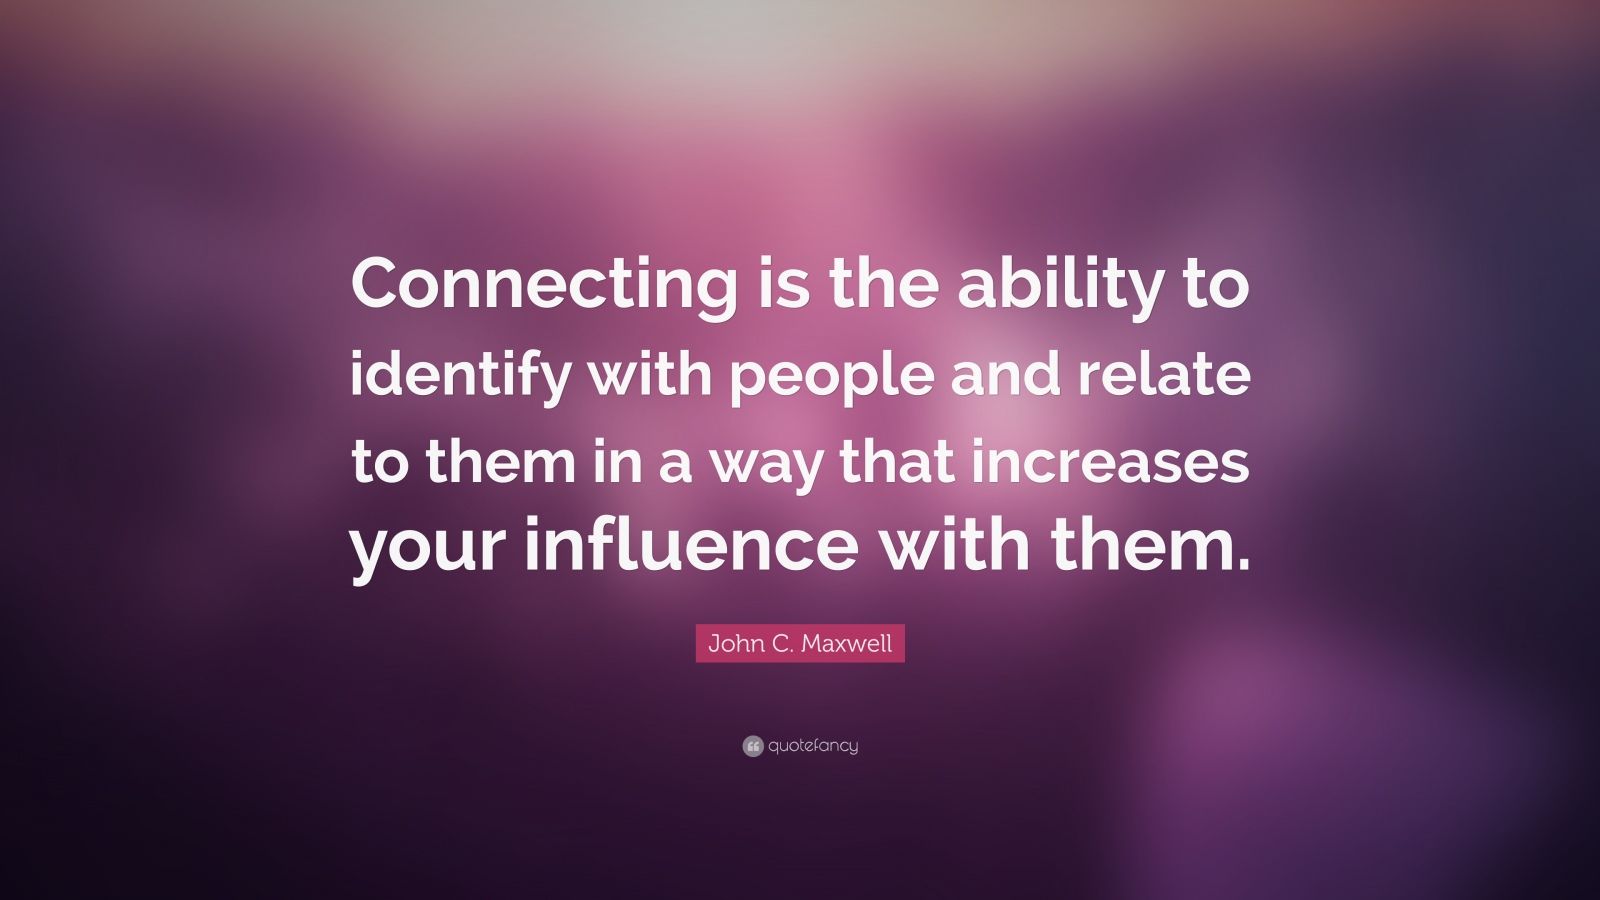 John C. Maxwell Quote “Connecting is the ability to